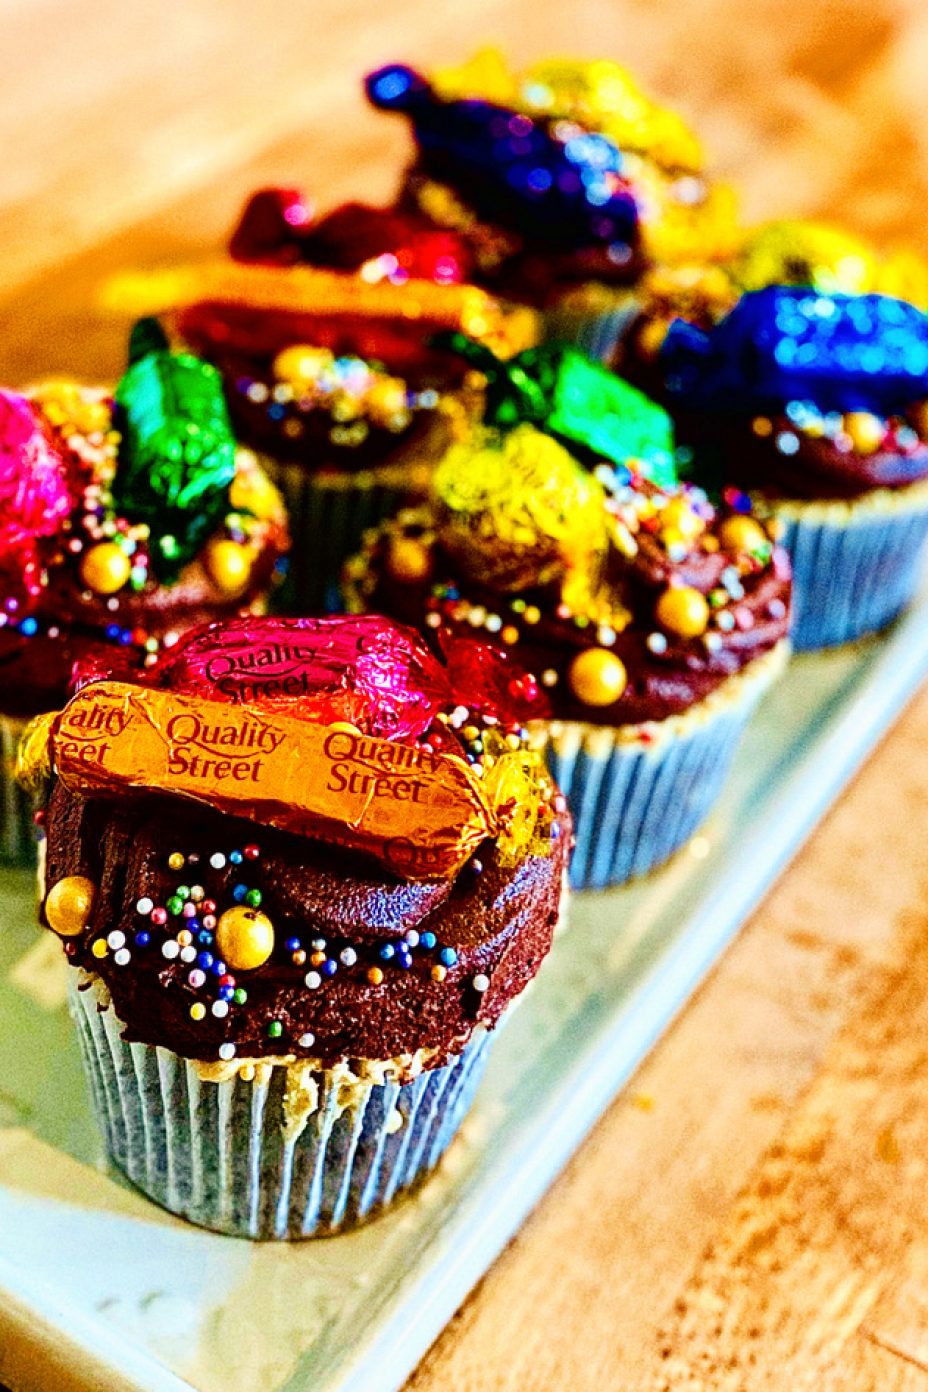 6 chocolate and dulce de leche cupcakes with chocolate icing and topped with a variety of Quality Street chocolates and gold sprinkles